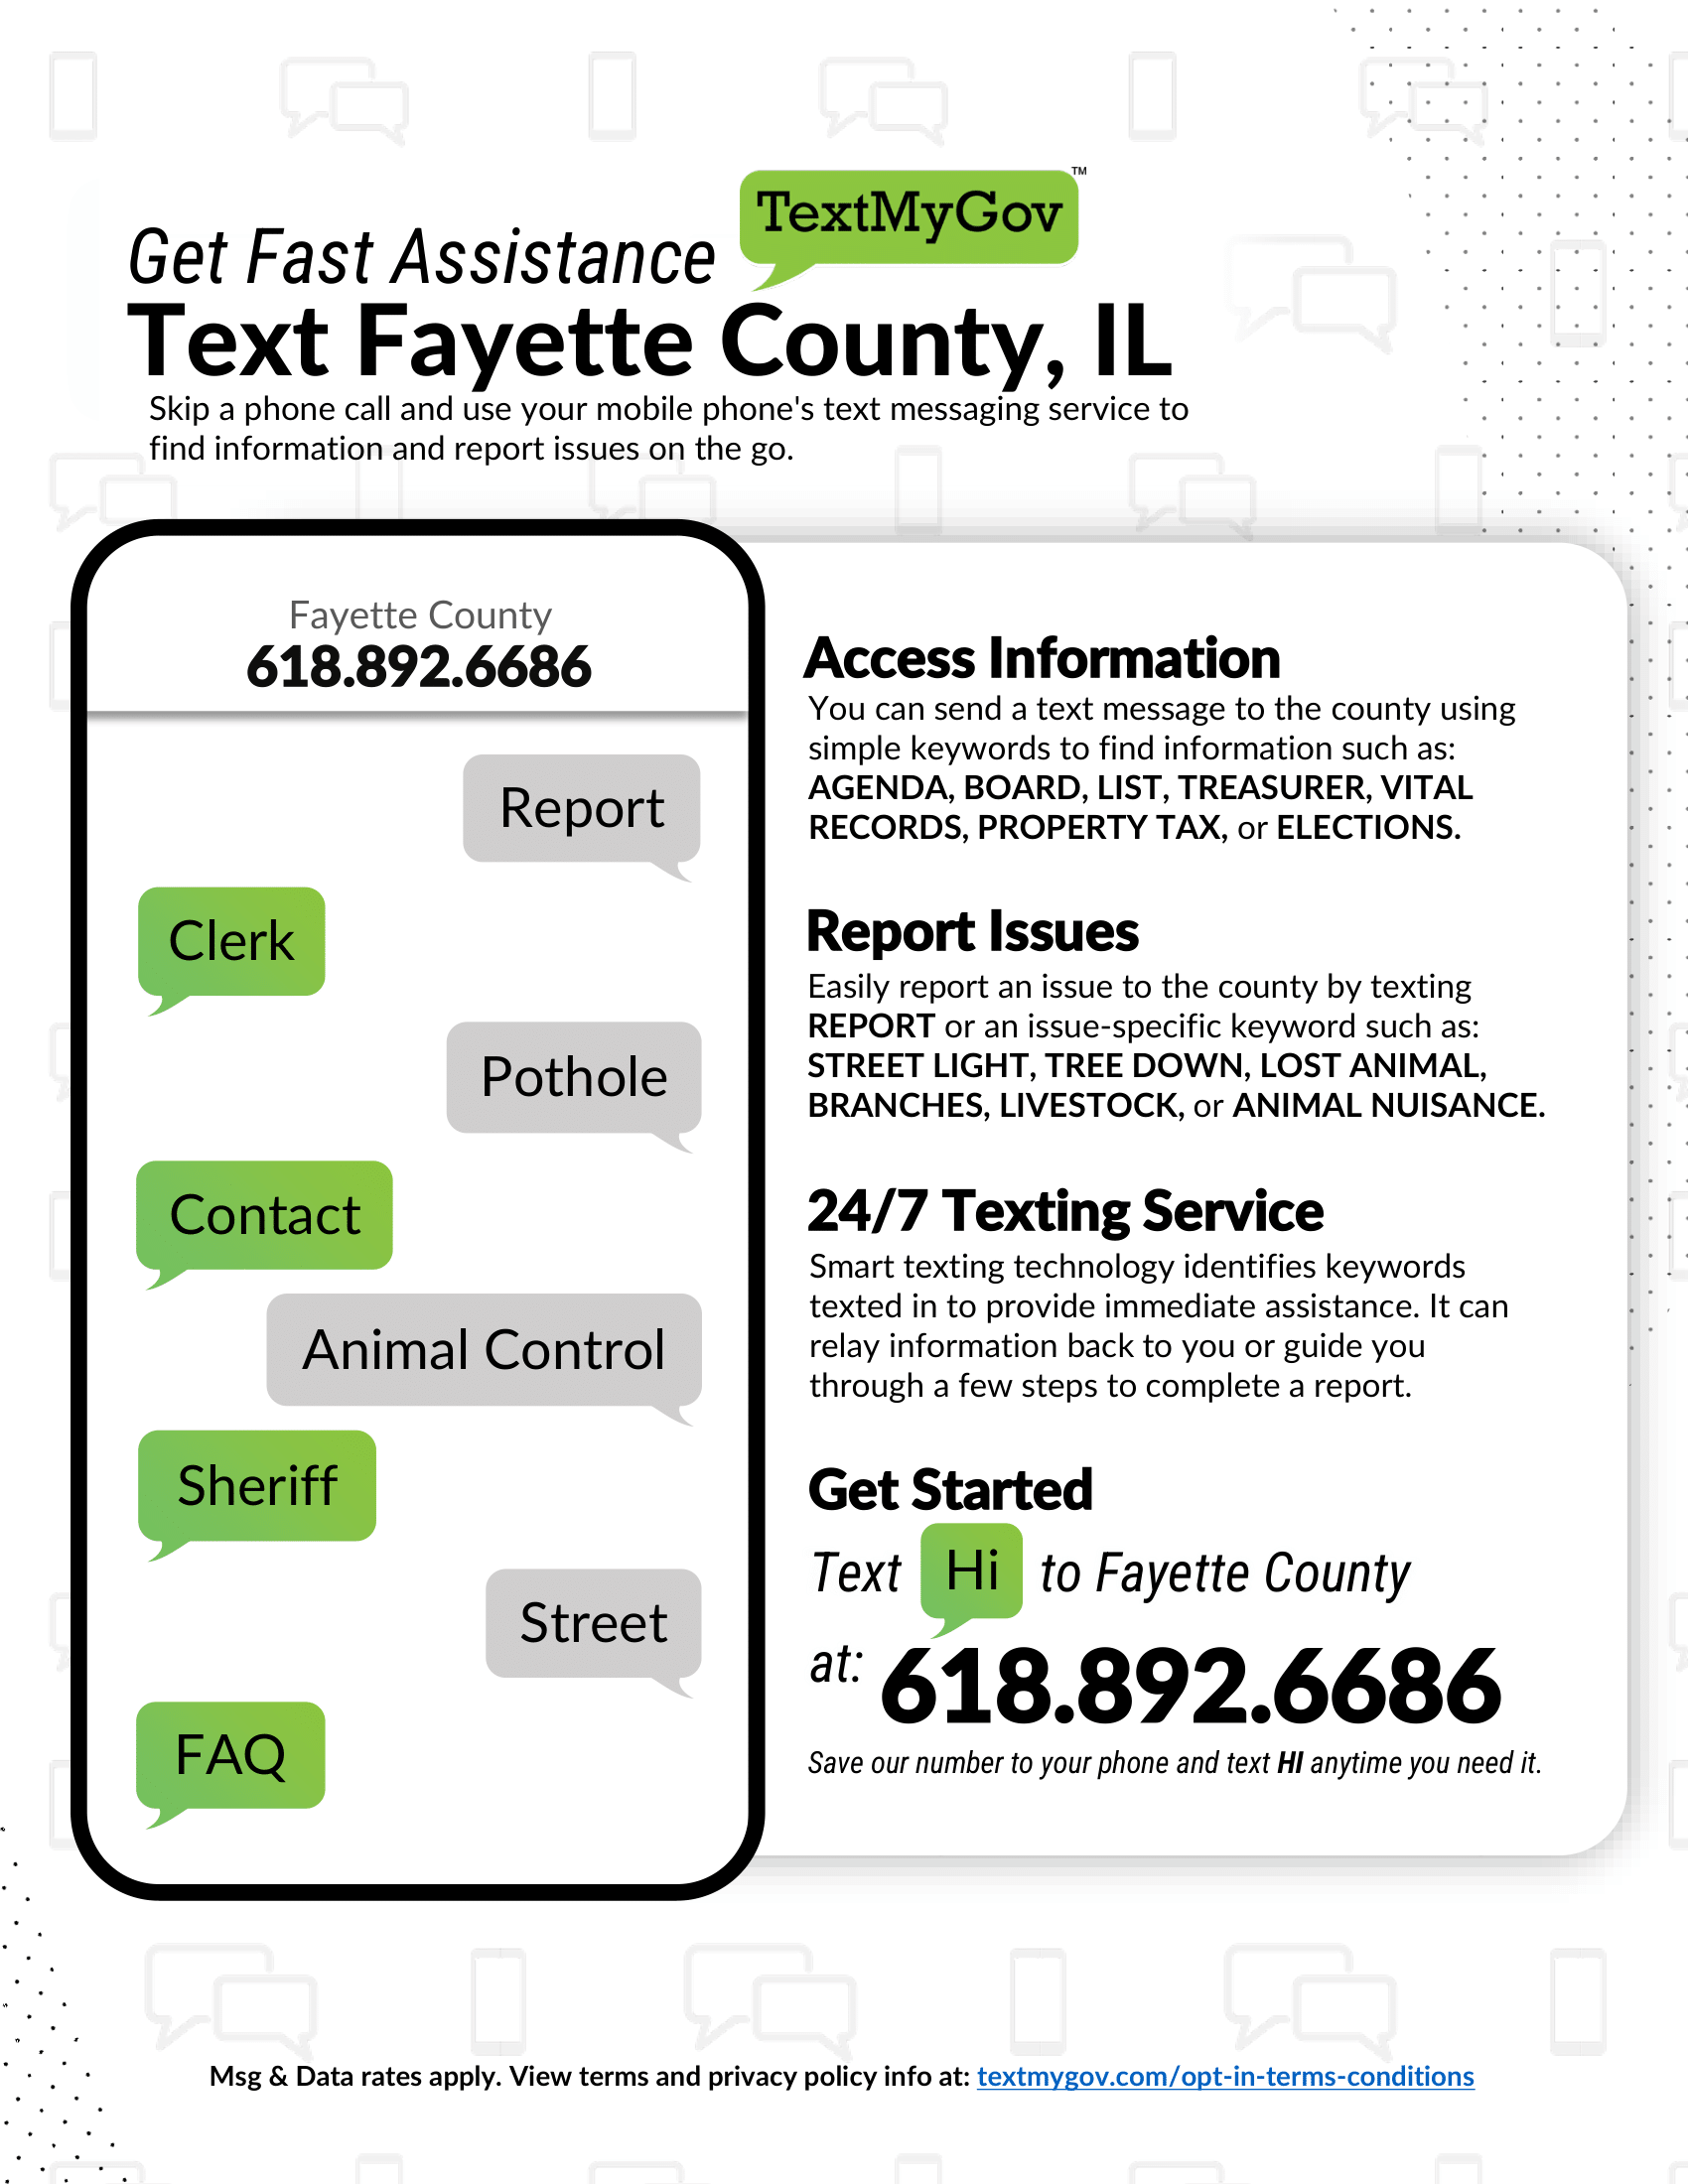 Fayette County Text My Gov